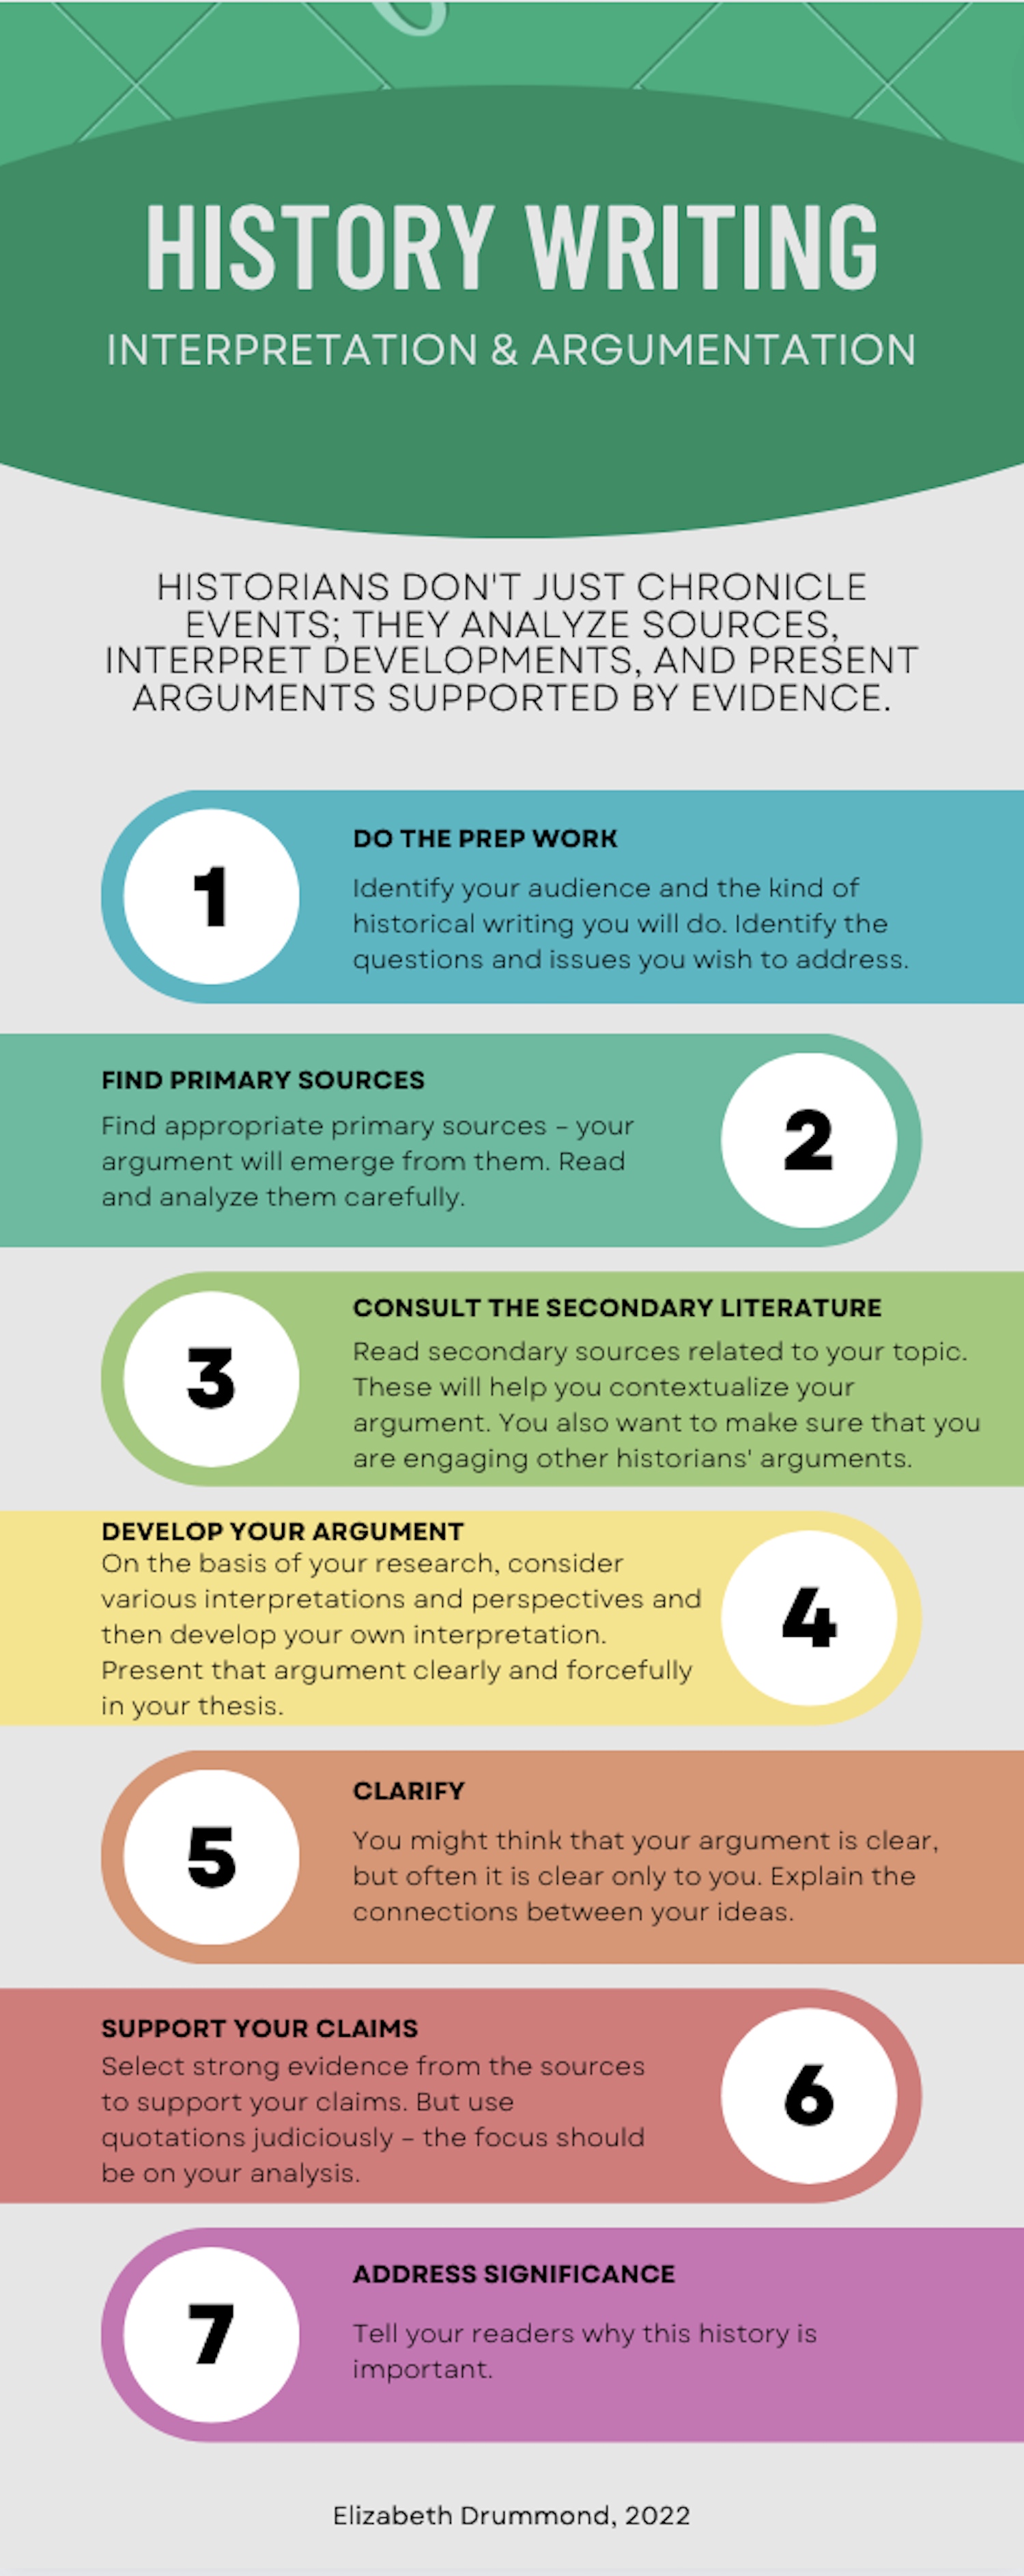 Infographic for how to write history: (1) do the prep work, (2) find primary sources, (3) consult the secondary literature, (4) develop your argument, (5) clarify, (6) support your claims, and (7) address significance.